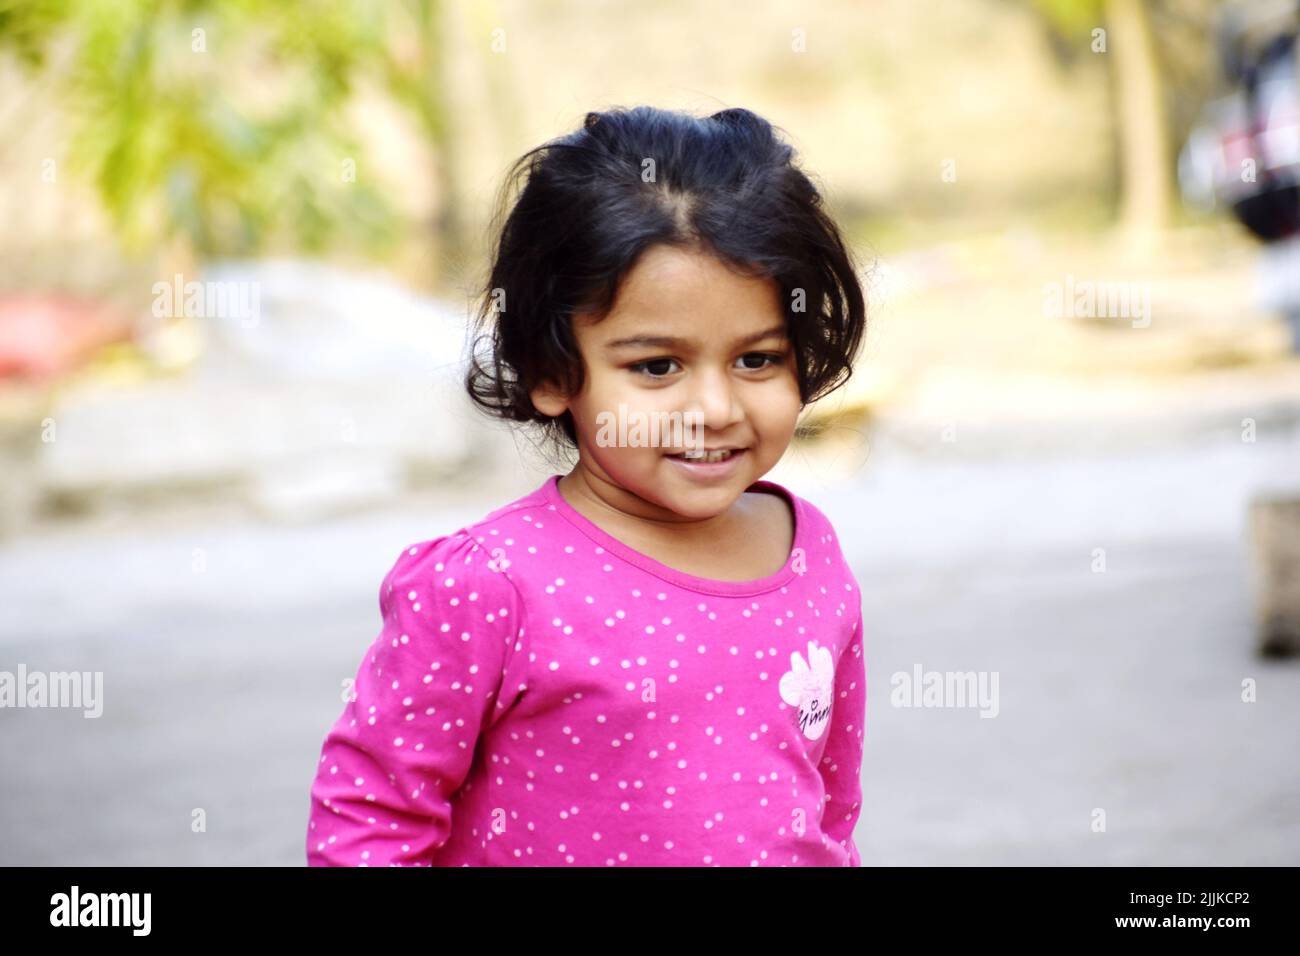 An Indian black-haired girl smiling and playing on the park Stock Photo